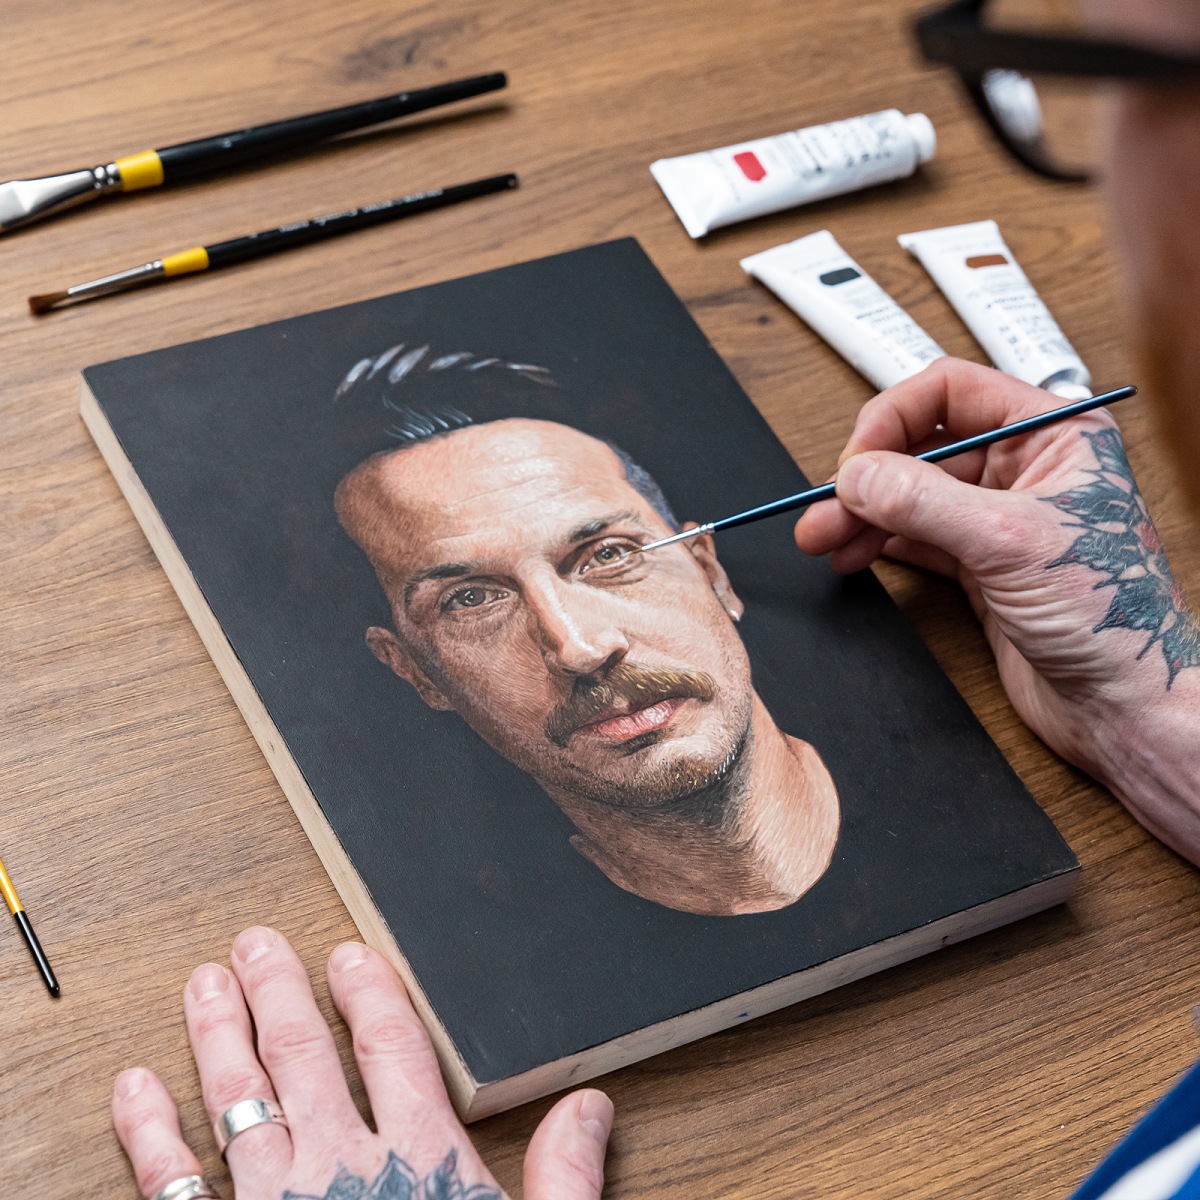 How I learned to draw realistic portraits in only 30 days